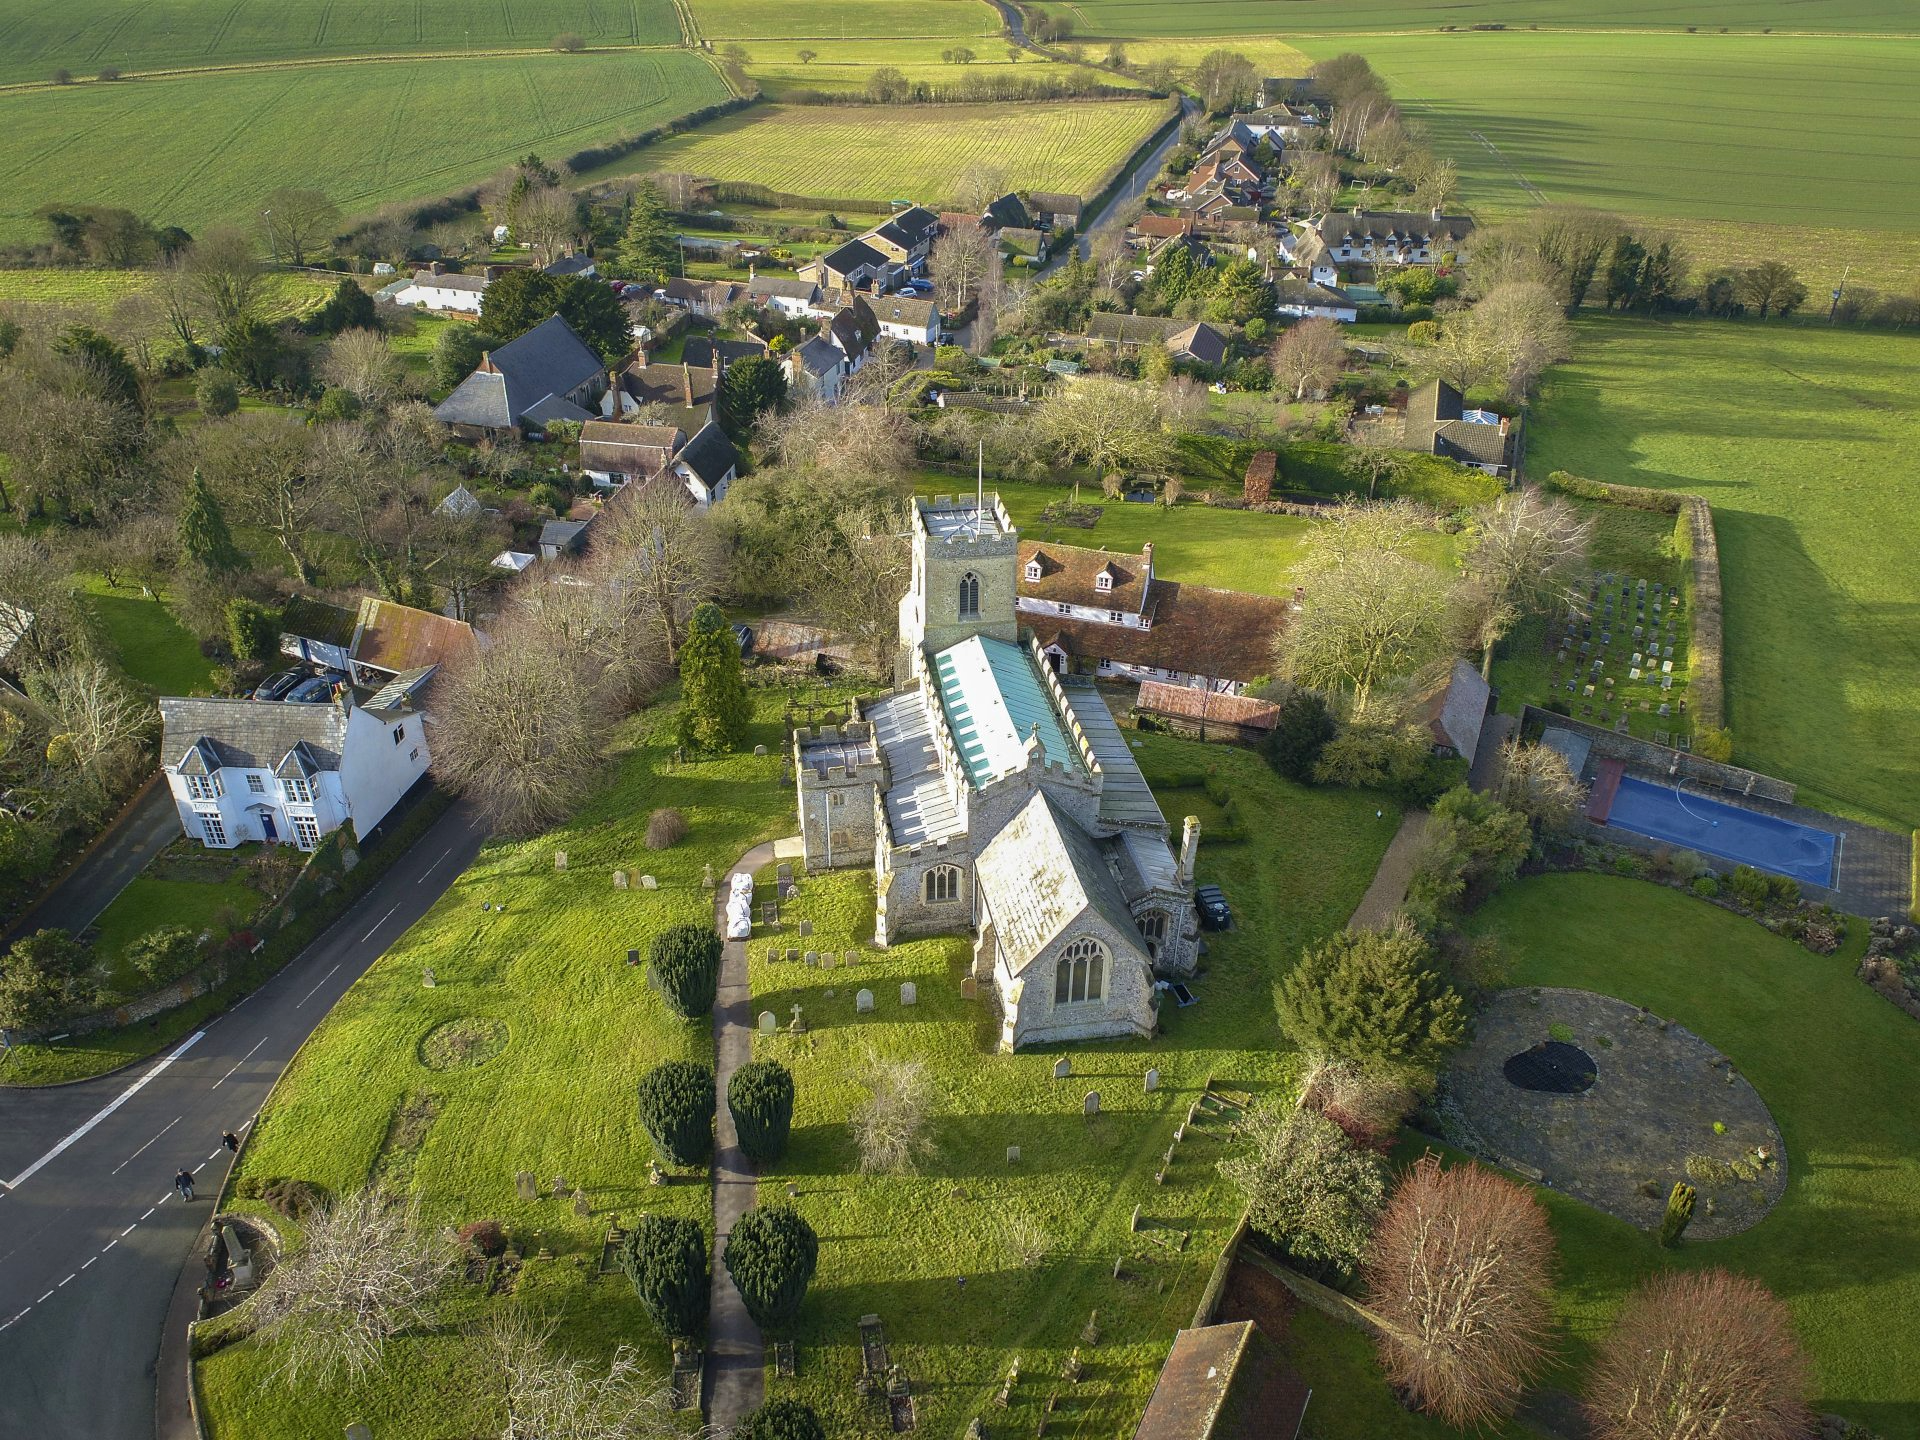 St swithin's church in great chishill drone image